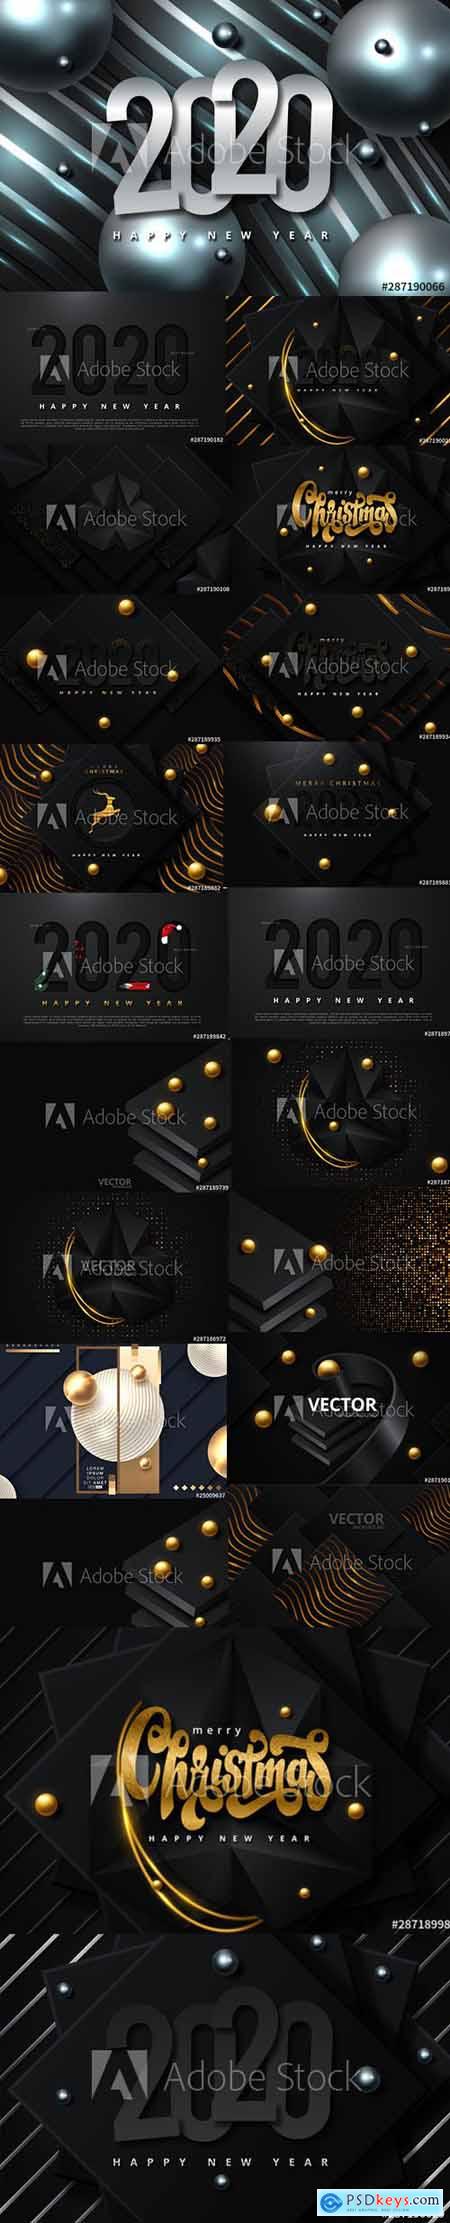 Vector Set - Happy New Year 2020 Illustration and Merry Christmas background